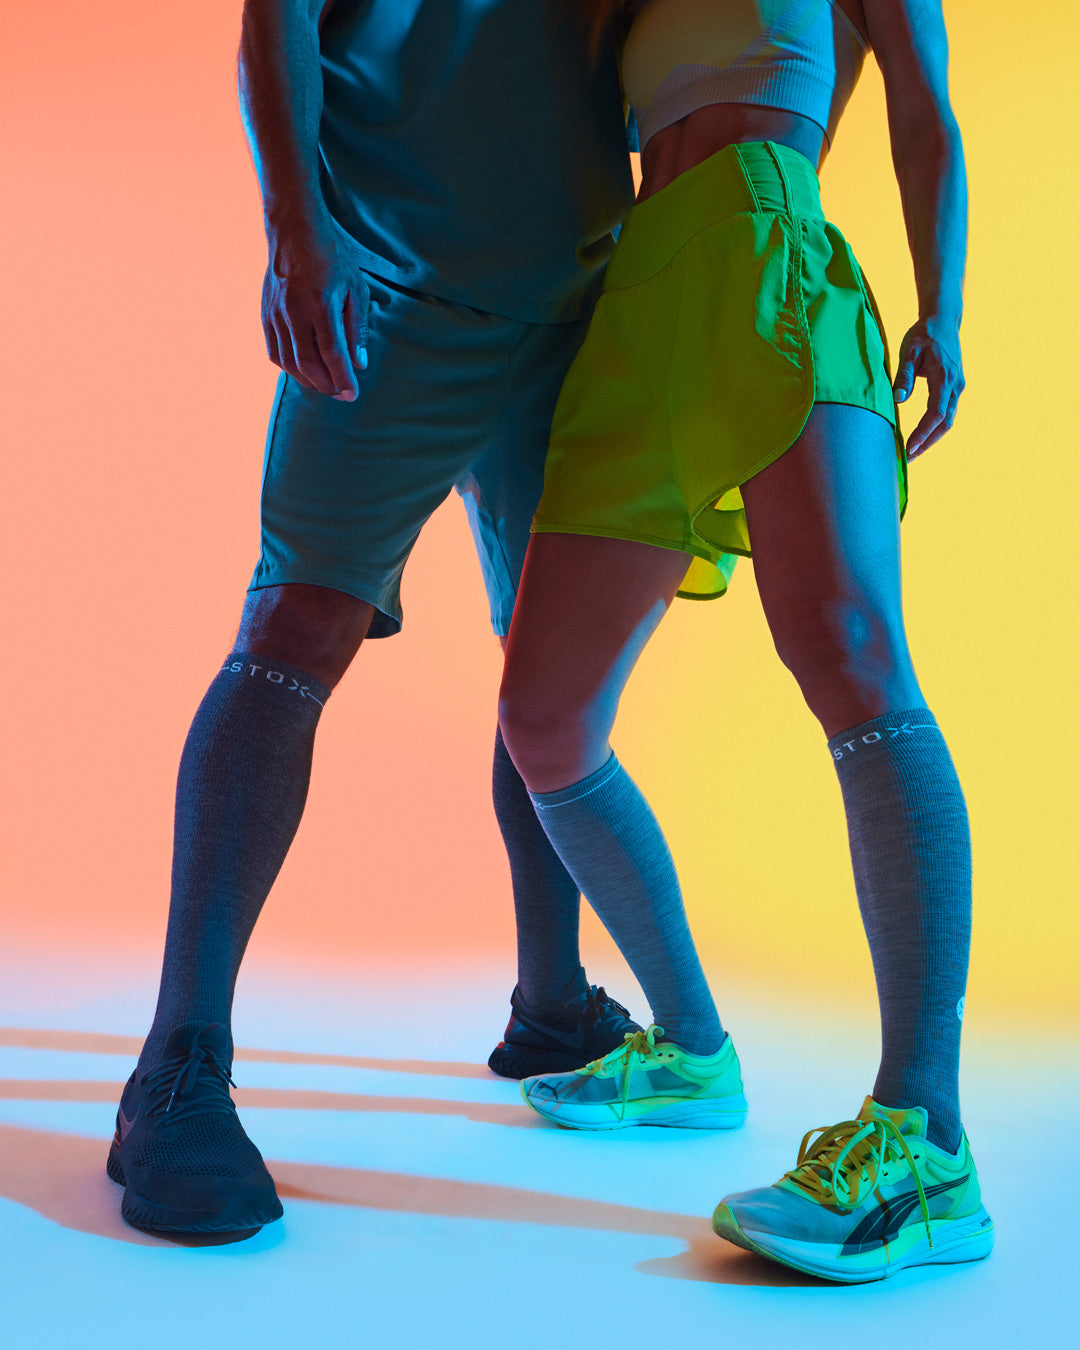 Men and woman standing with compression socks.